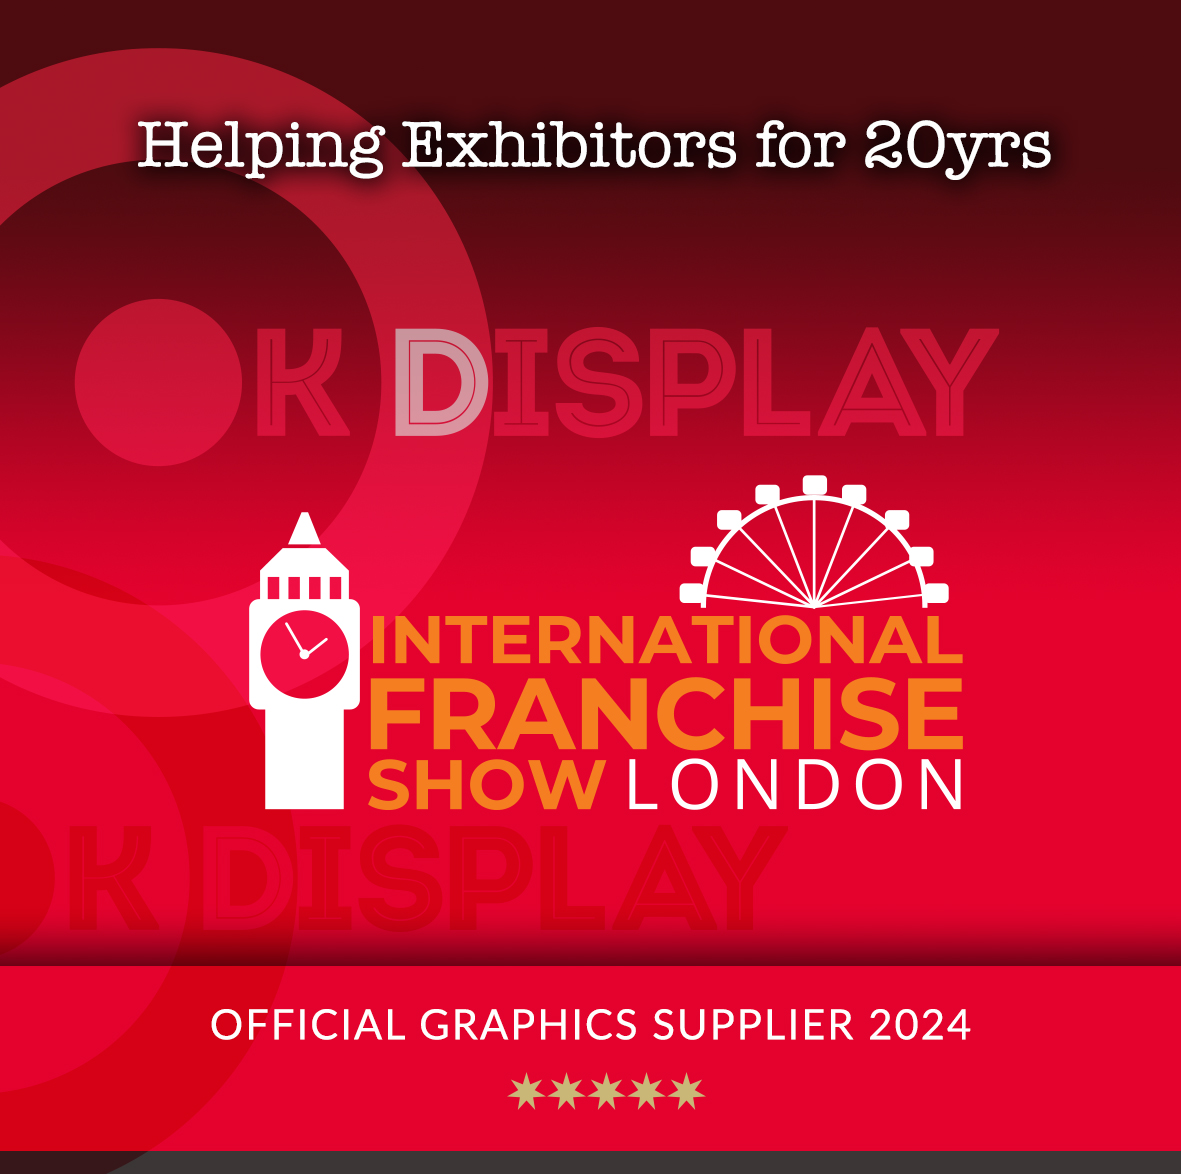 Check out the #IFS24 and thefranchiseshow.co.uk We began printing organiser & exhibitor graphics at this expo 20yrs ago. Official Graphics Supplier AGAIN 2024! #Startup  #RelyOnUs #Dependable